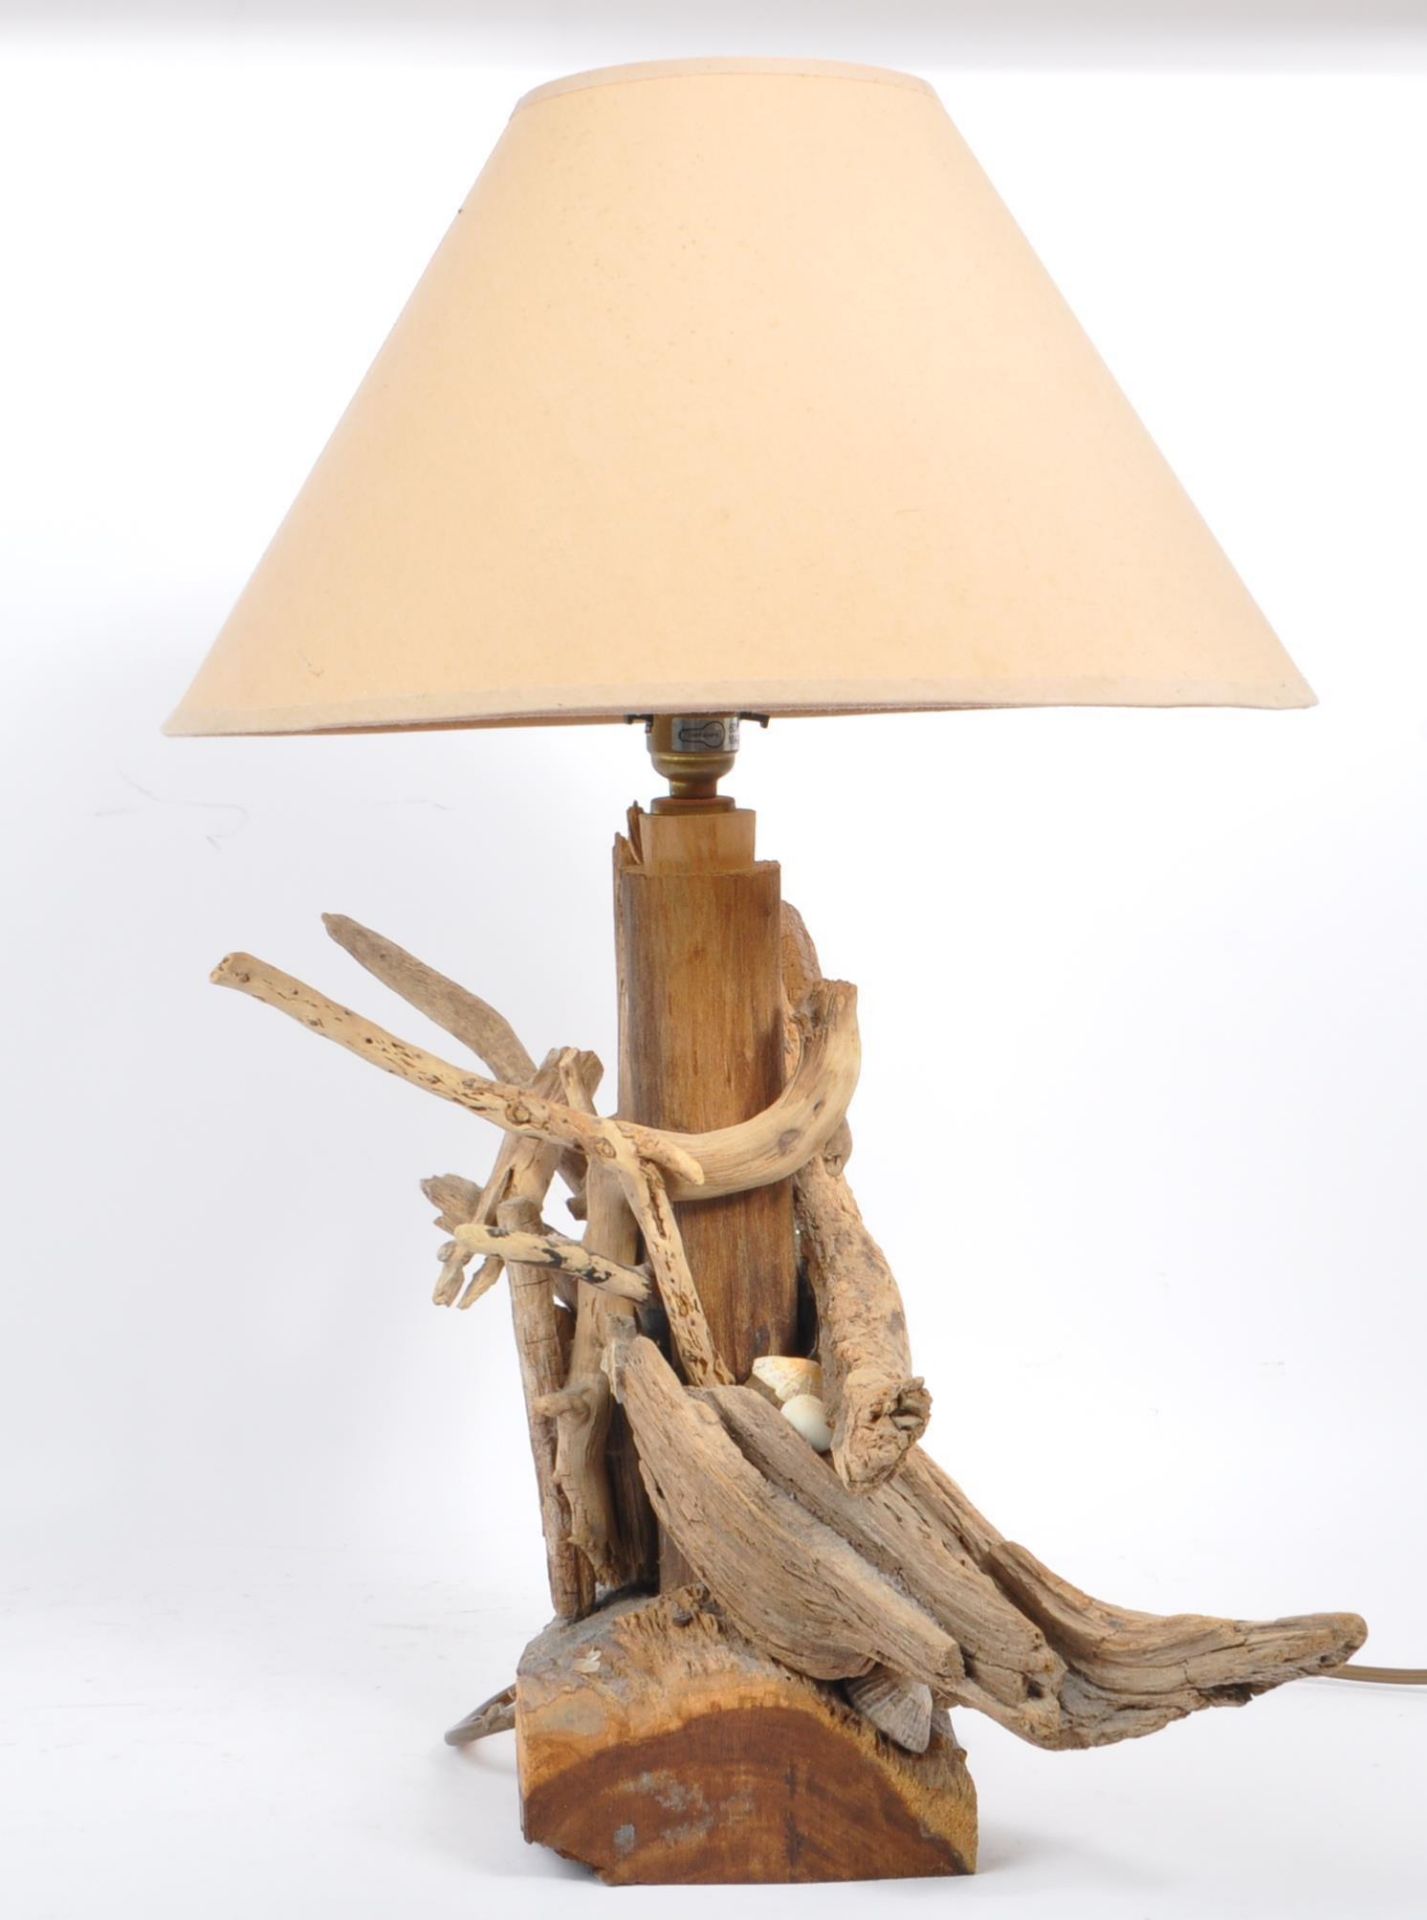 CONTEMPORARY DRIFTWOOD TABLE LAMP - Image 4 of 8